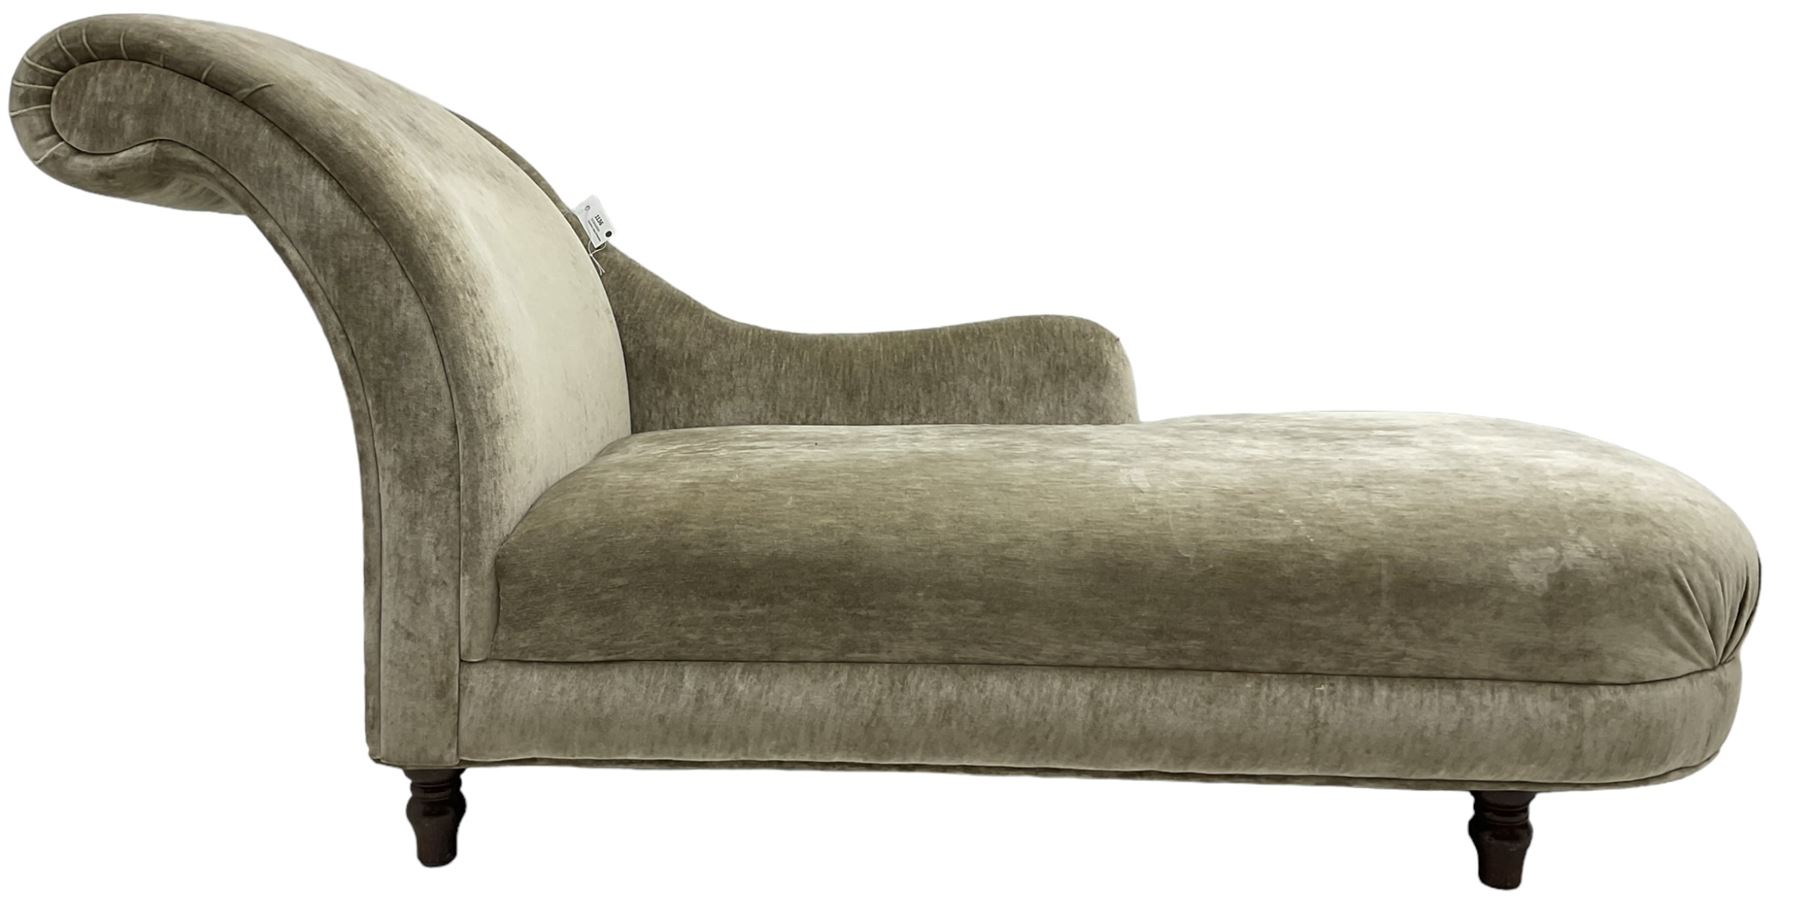 Contemporary chaise longue with scrolled back - Image 3 of 8